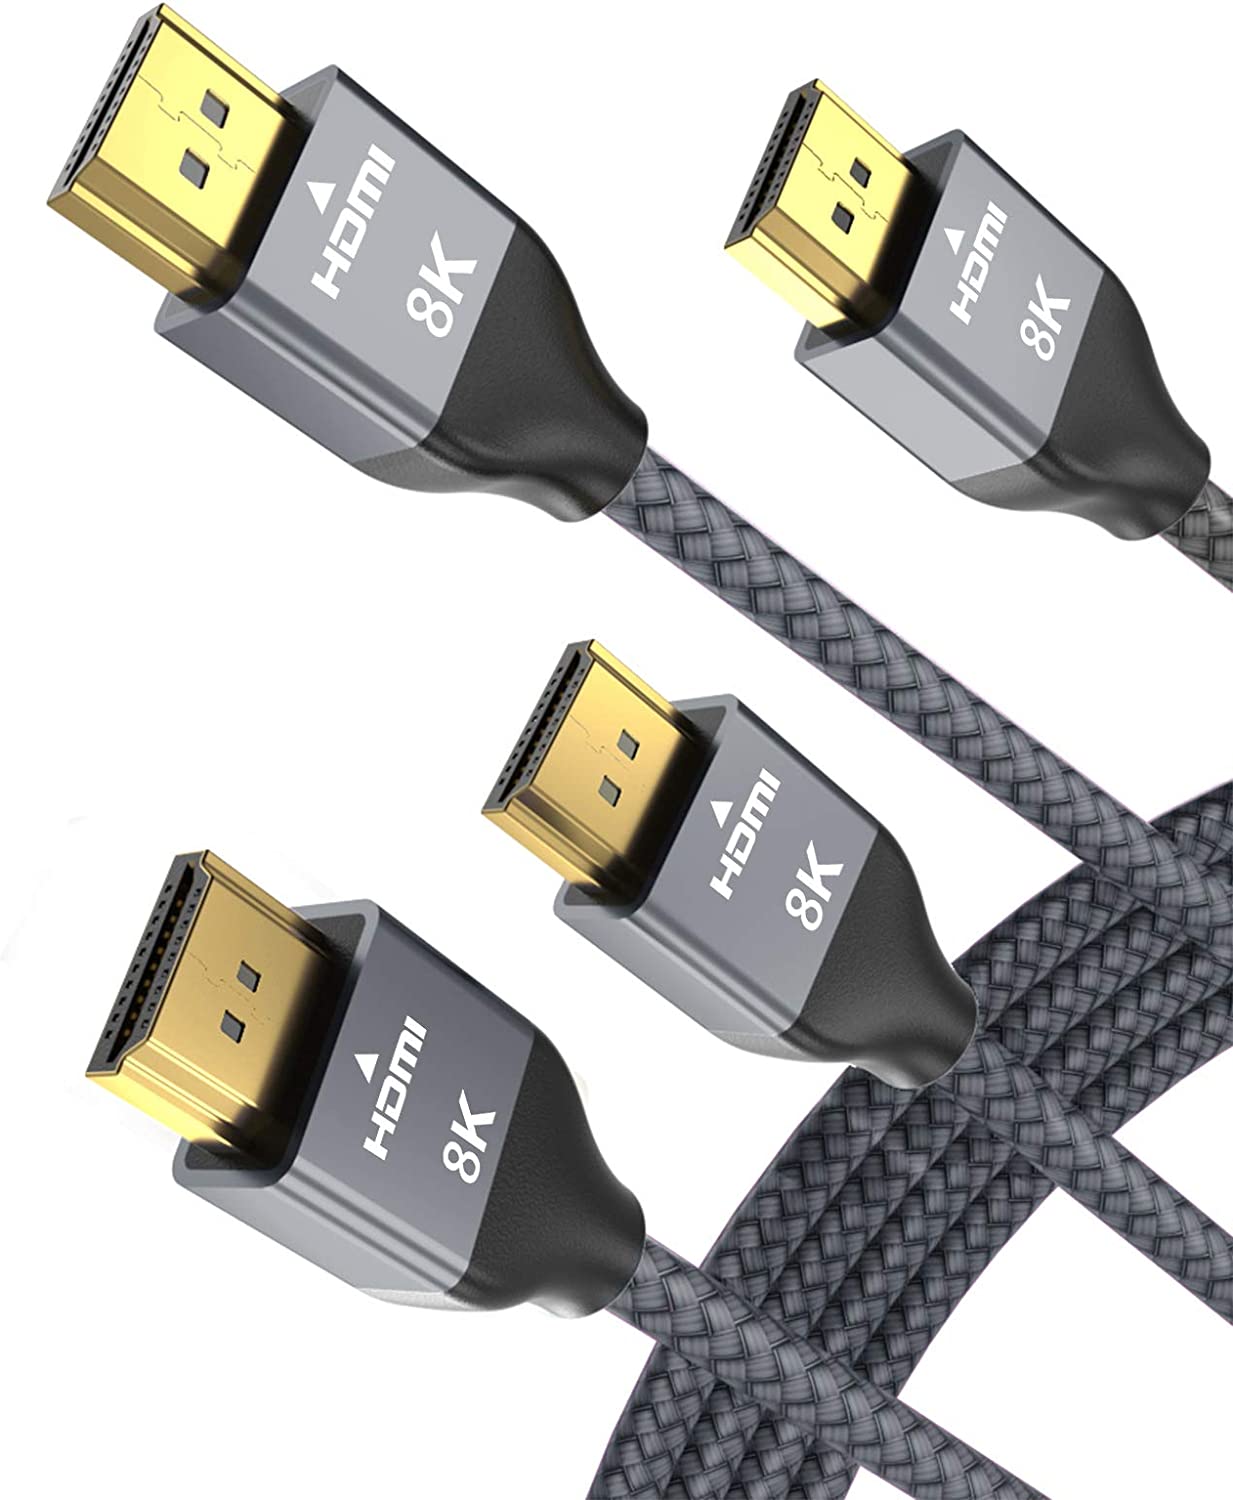  4. Basesailor 8K 60Hz HDMI Cable 